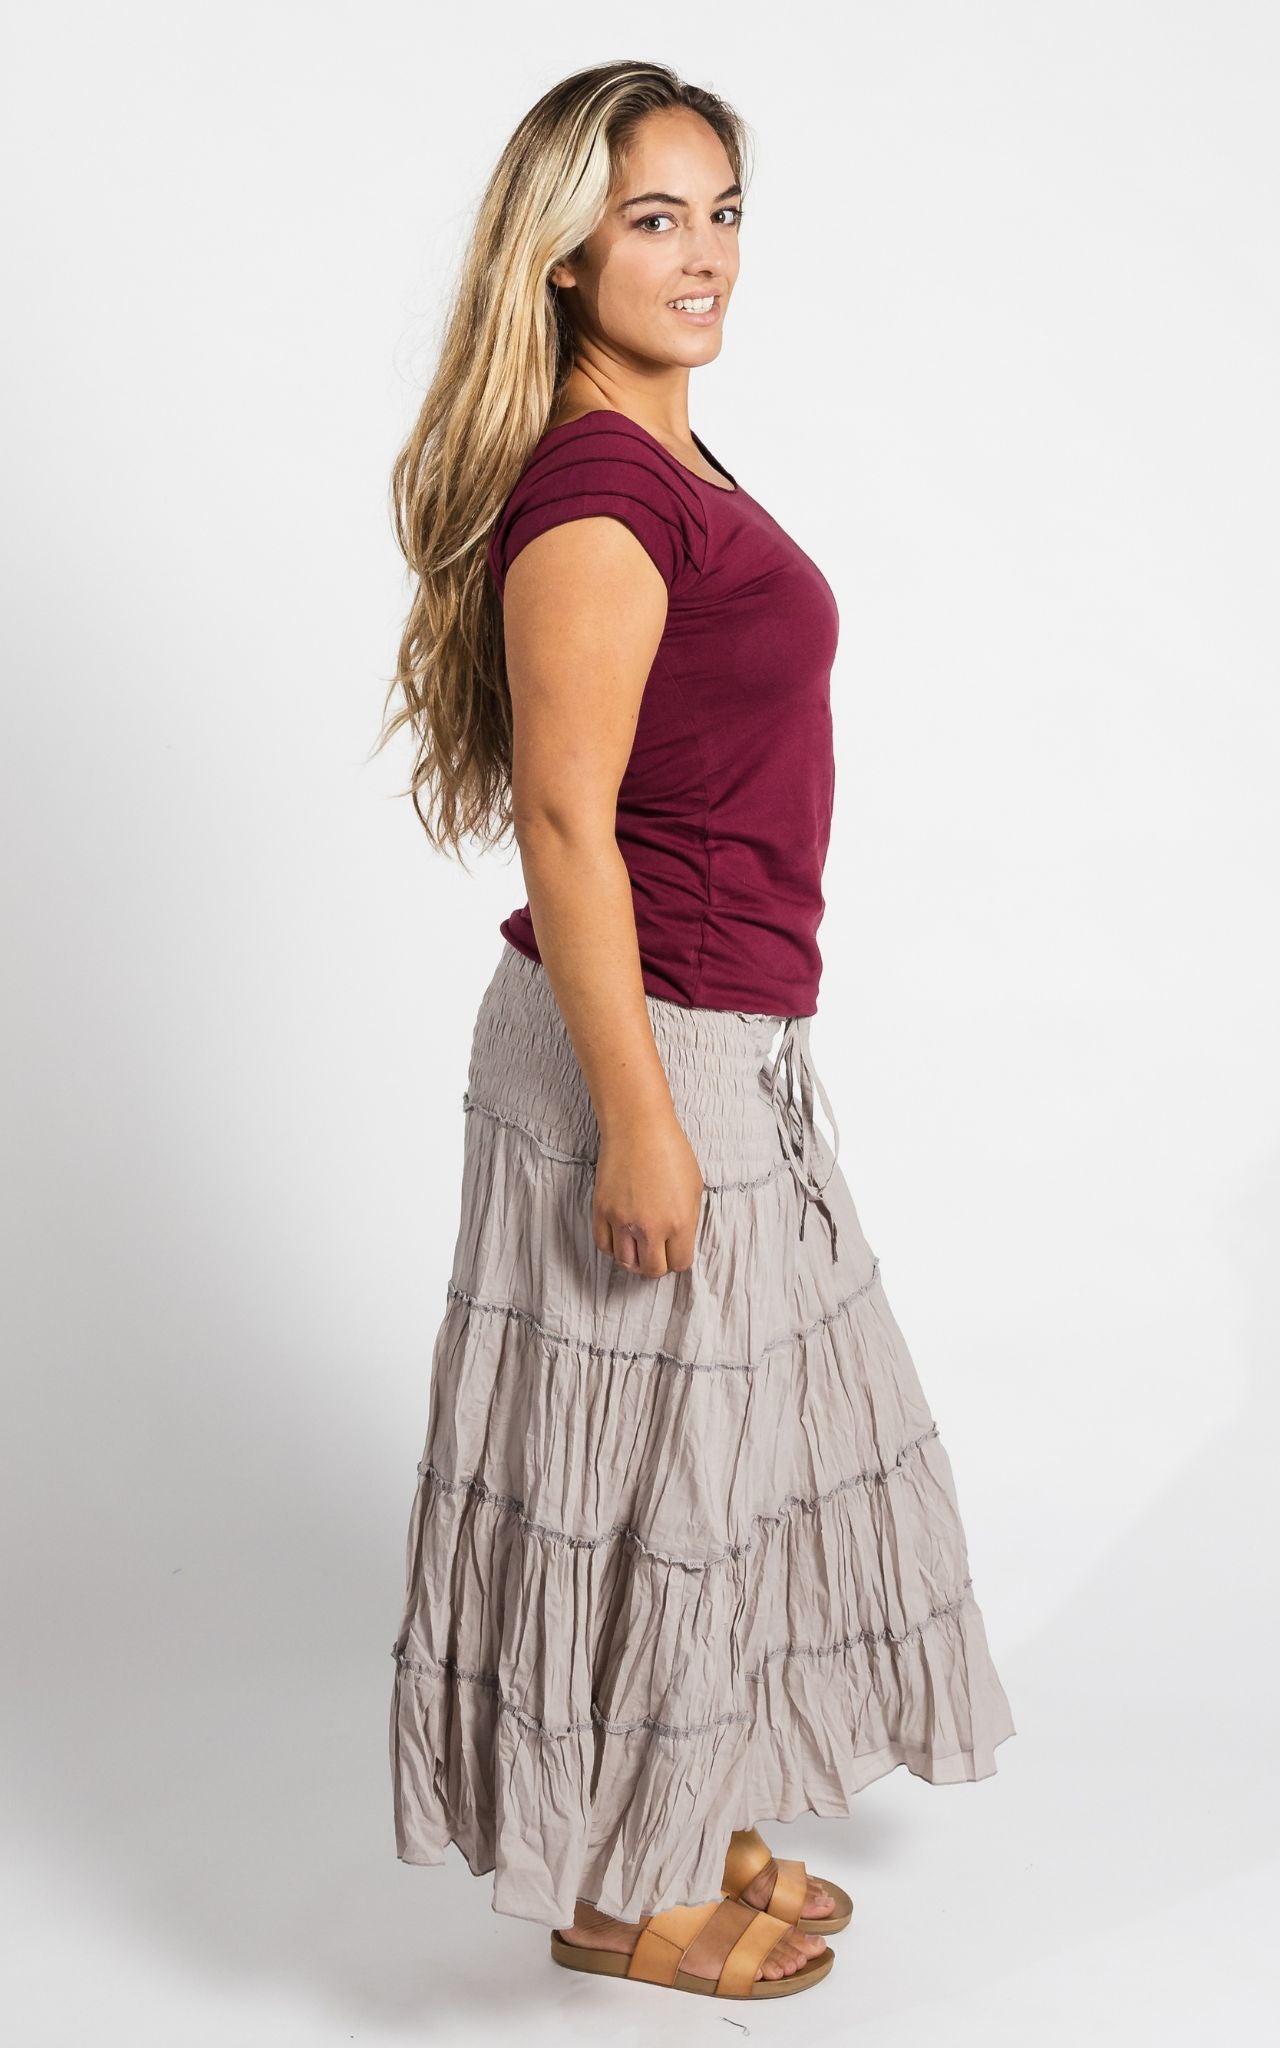 Surya Australia Ethical Cotton 'Franit' Skirt made in Nepal - Oatmeal